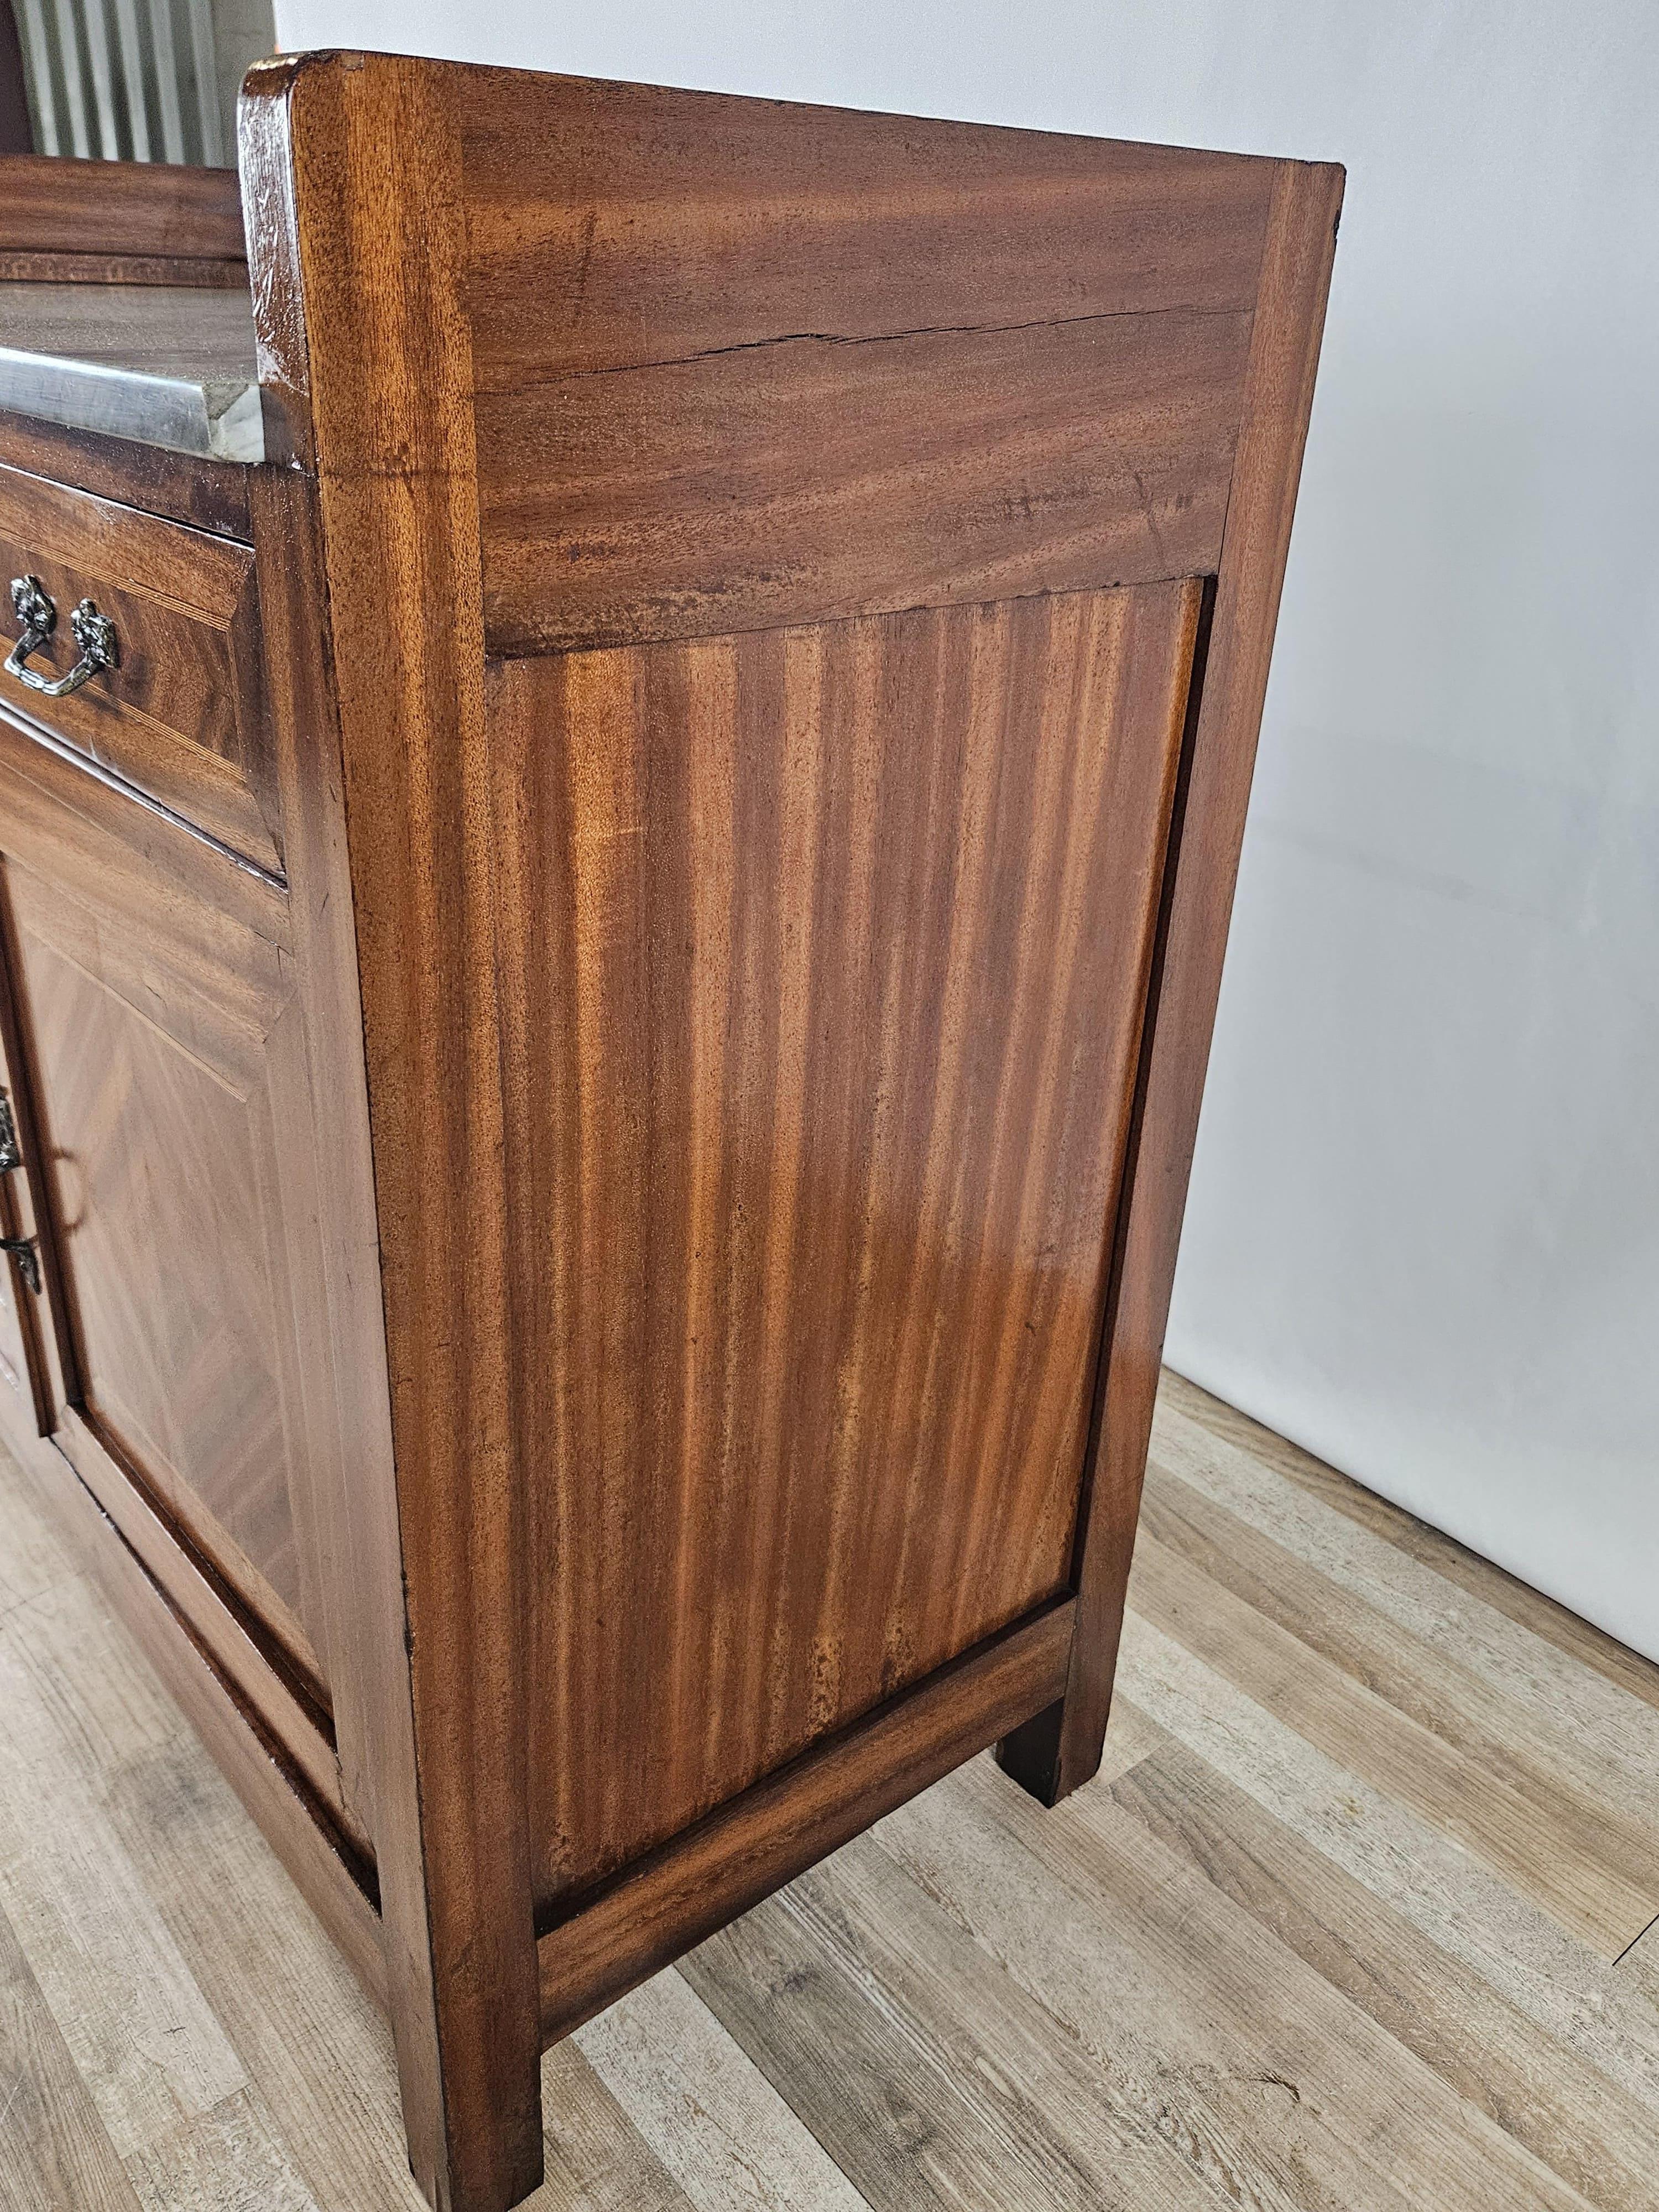 Art Nouveau walnut sideboard with marble top 20th century In Good Condition For Sale In Premariacco, IT